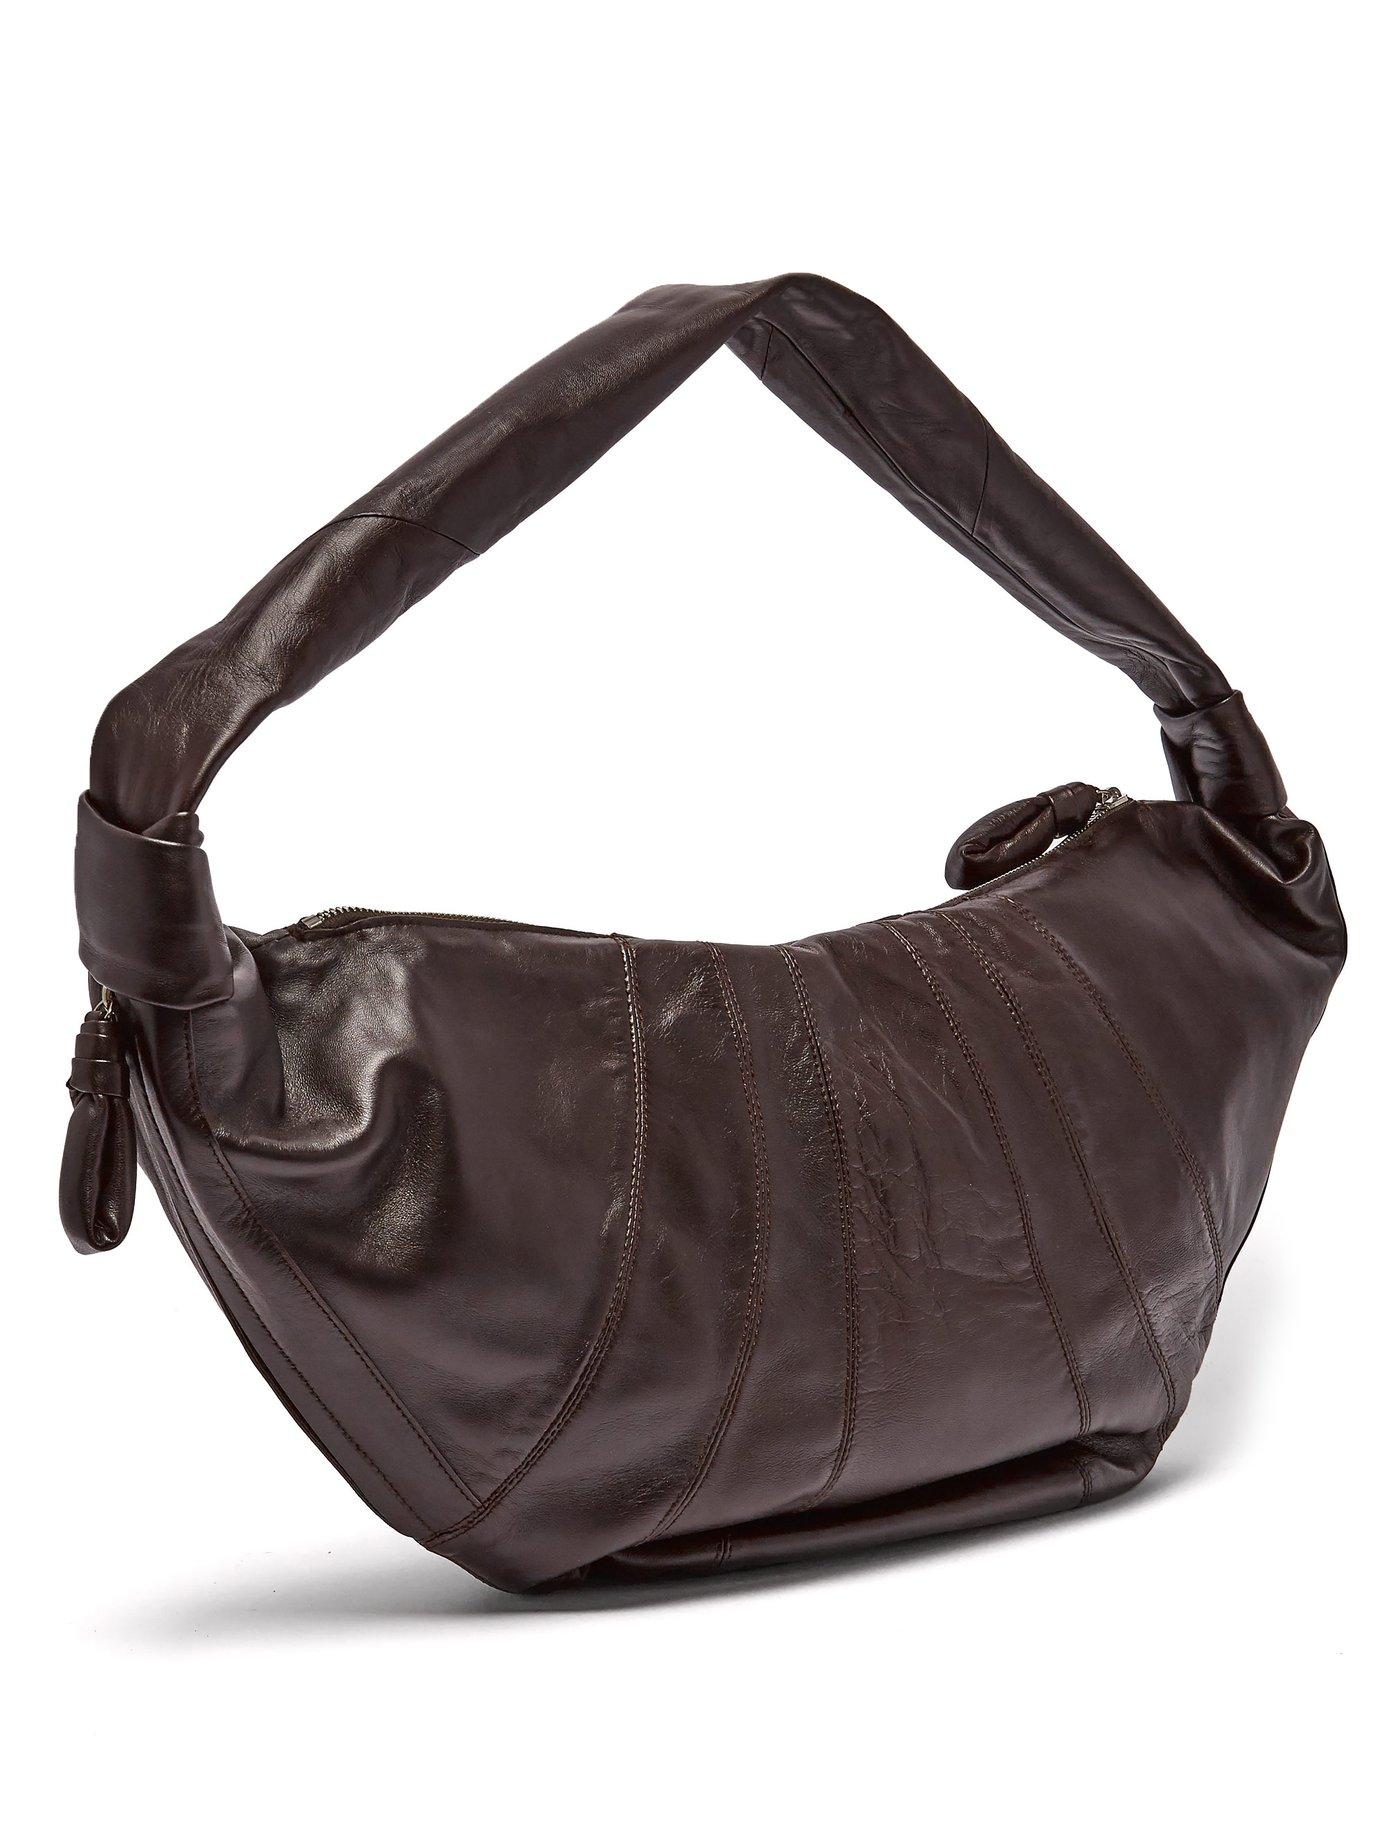 Lemaire Maxi Croissant Panelled Leather Shoulder Bag in Dark Brown ...